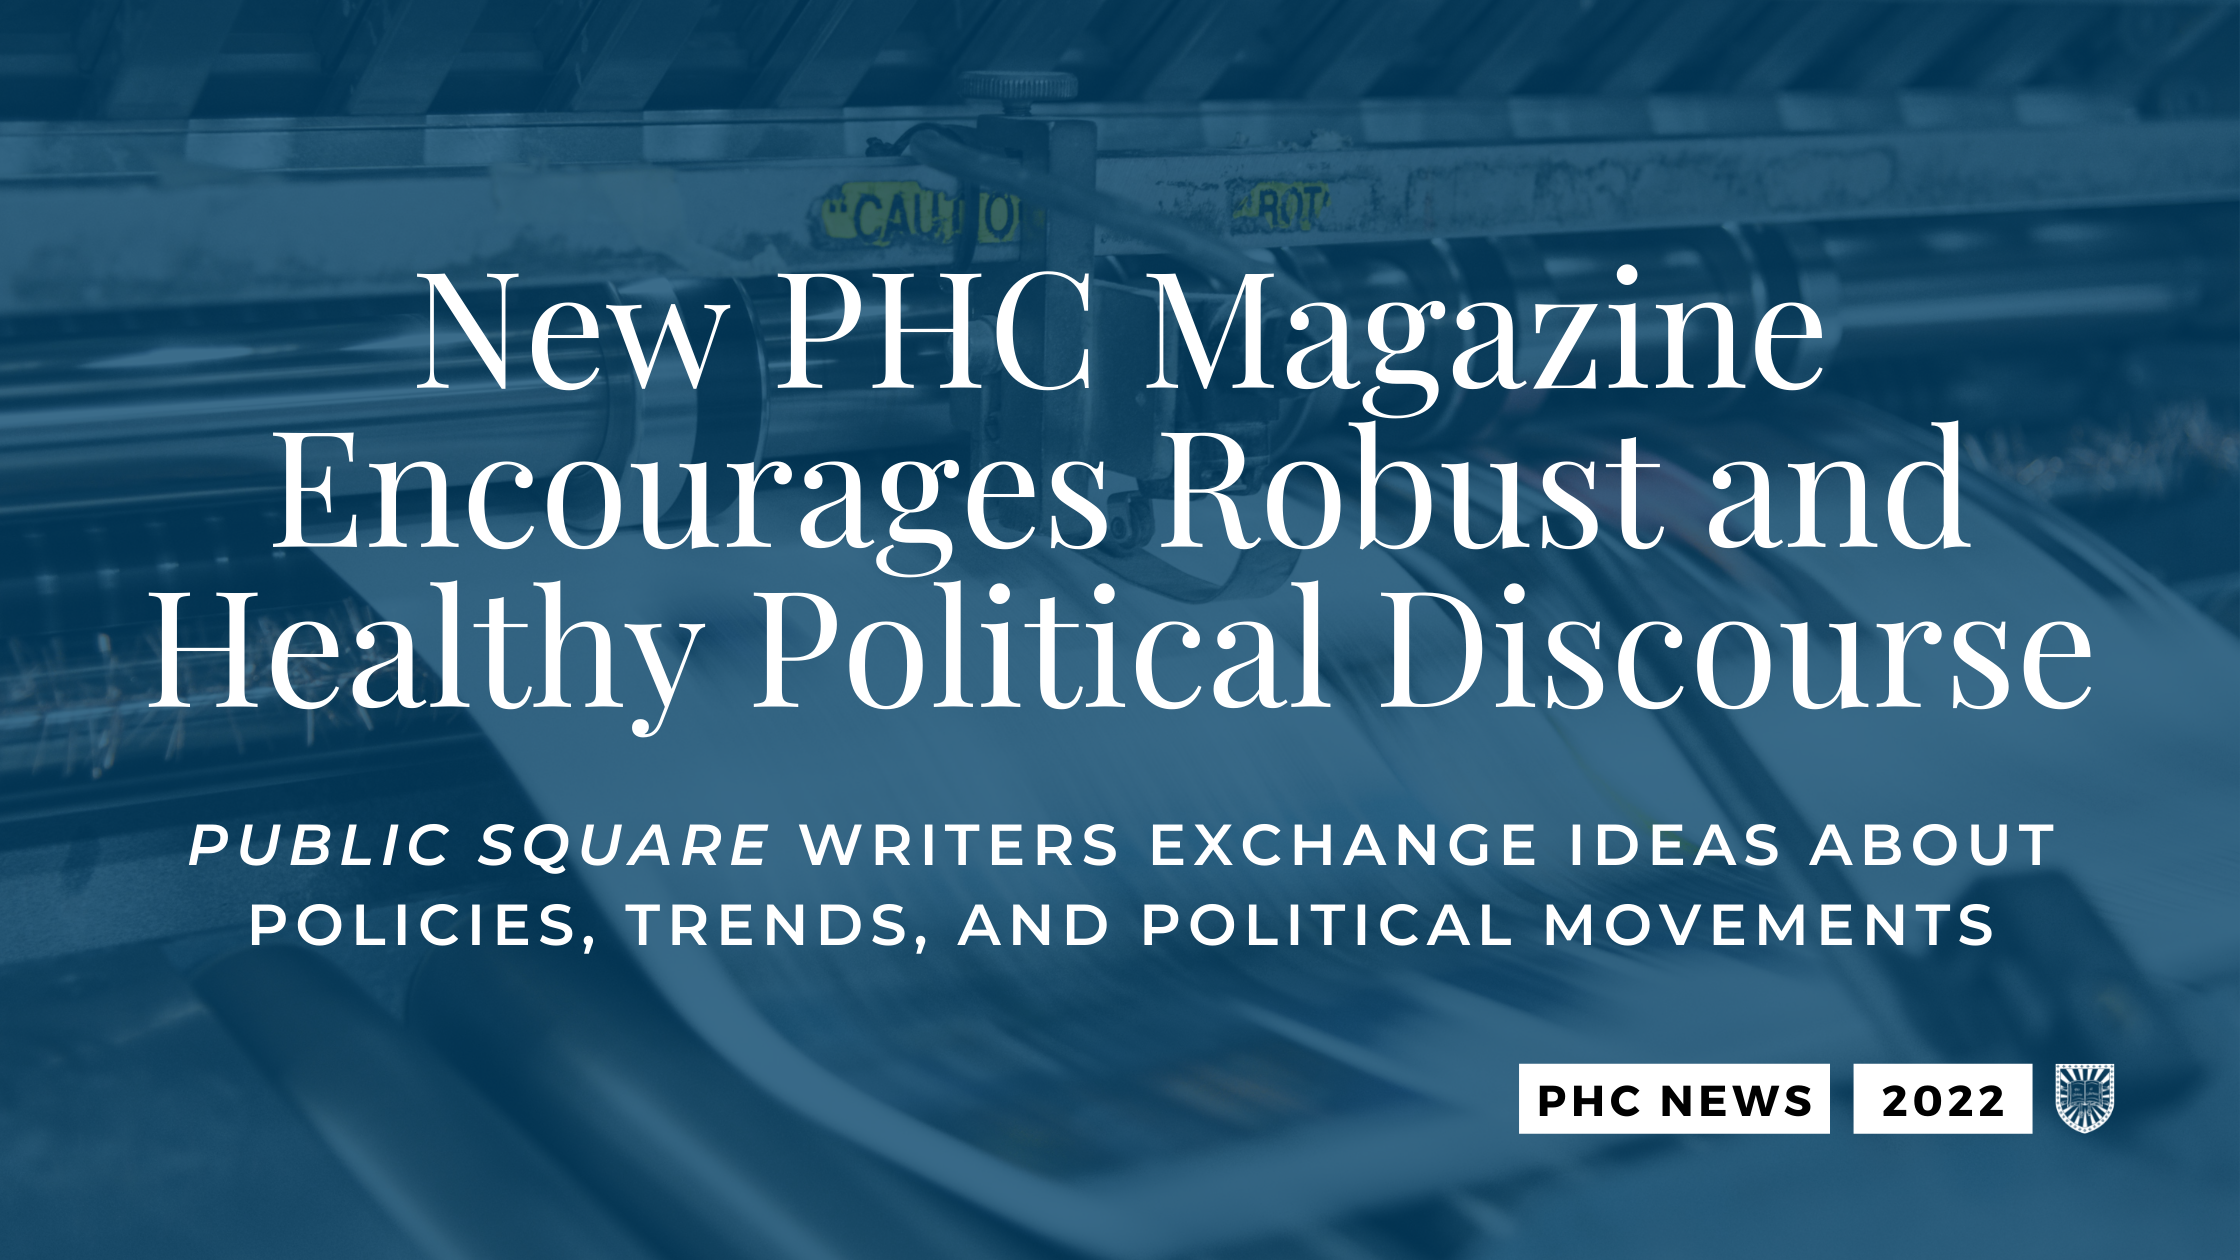 New PHC Magazine Encourages Robust and Healthy Political Discourse